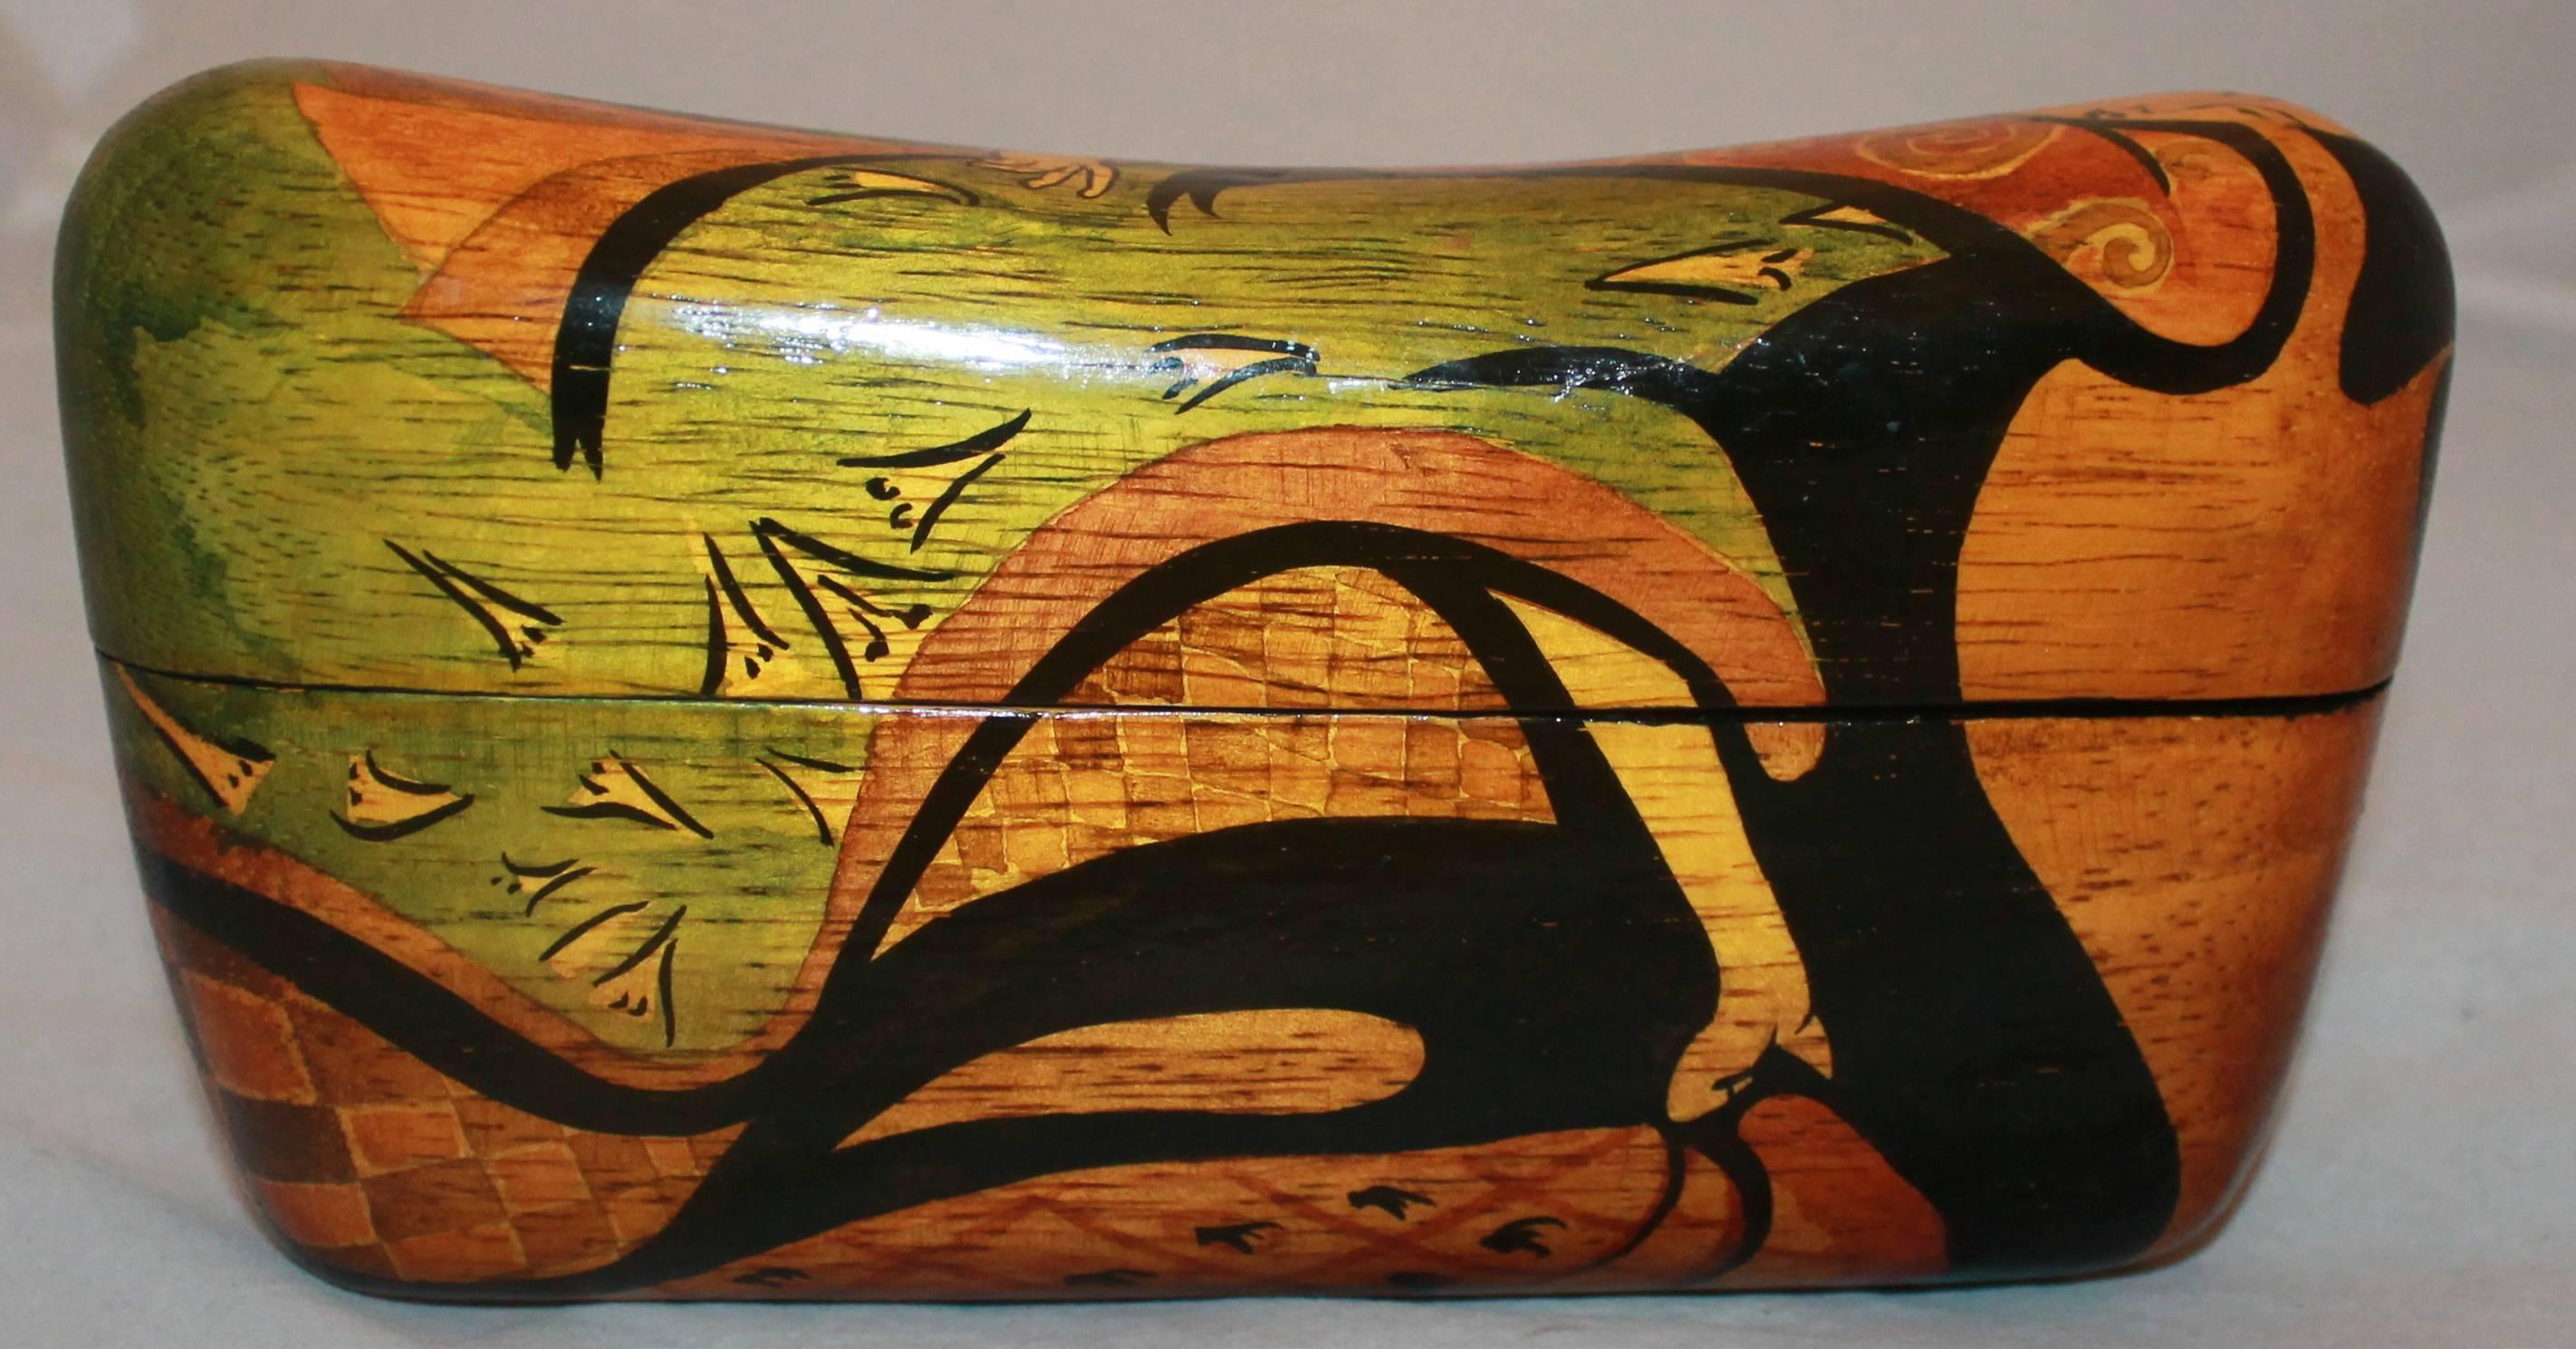 Rafael Sanchez Wooden Clutch w/ Abstract Painted Design & Black Tassel Cinch.  This unique wooden clutch is in excellent condition.  It features an abstract painting of an Asian woman and a black tassel cinch to keep it closed.  It is a special